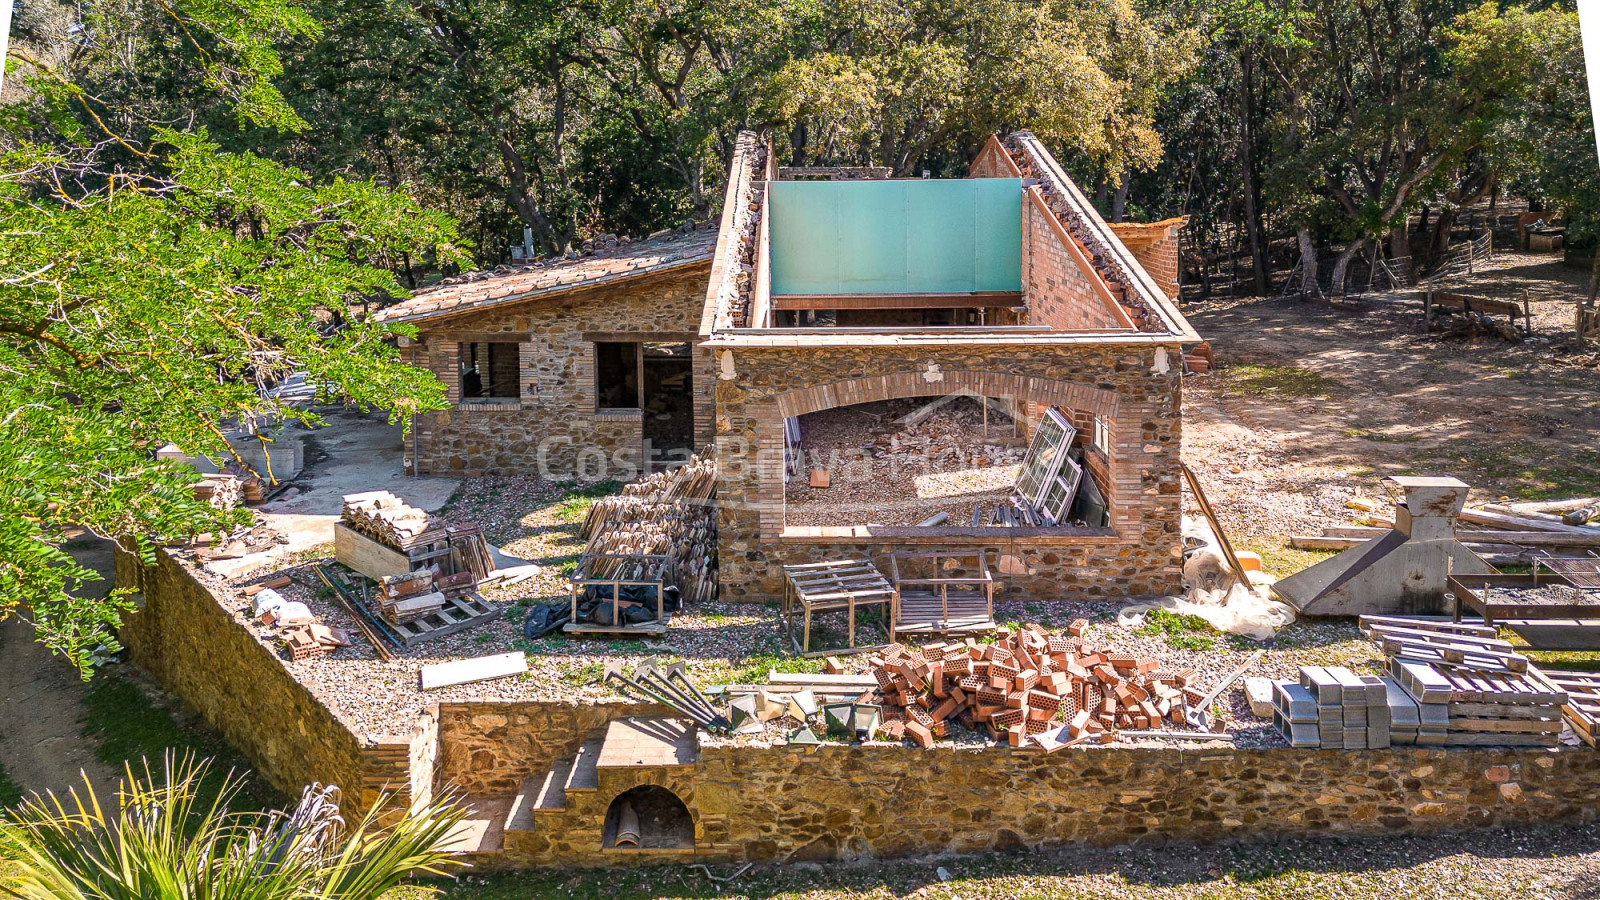 Estate for sale between Esclanyà and Begur with a masia under construction